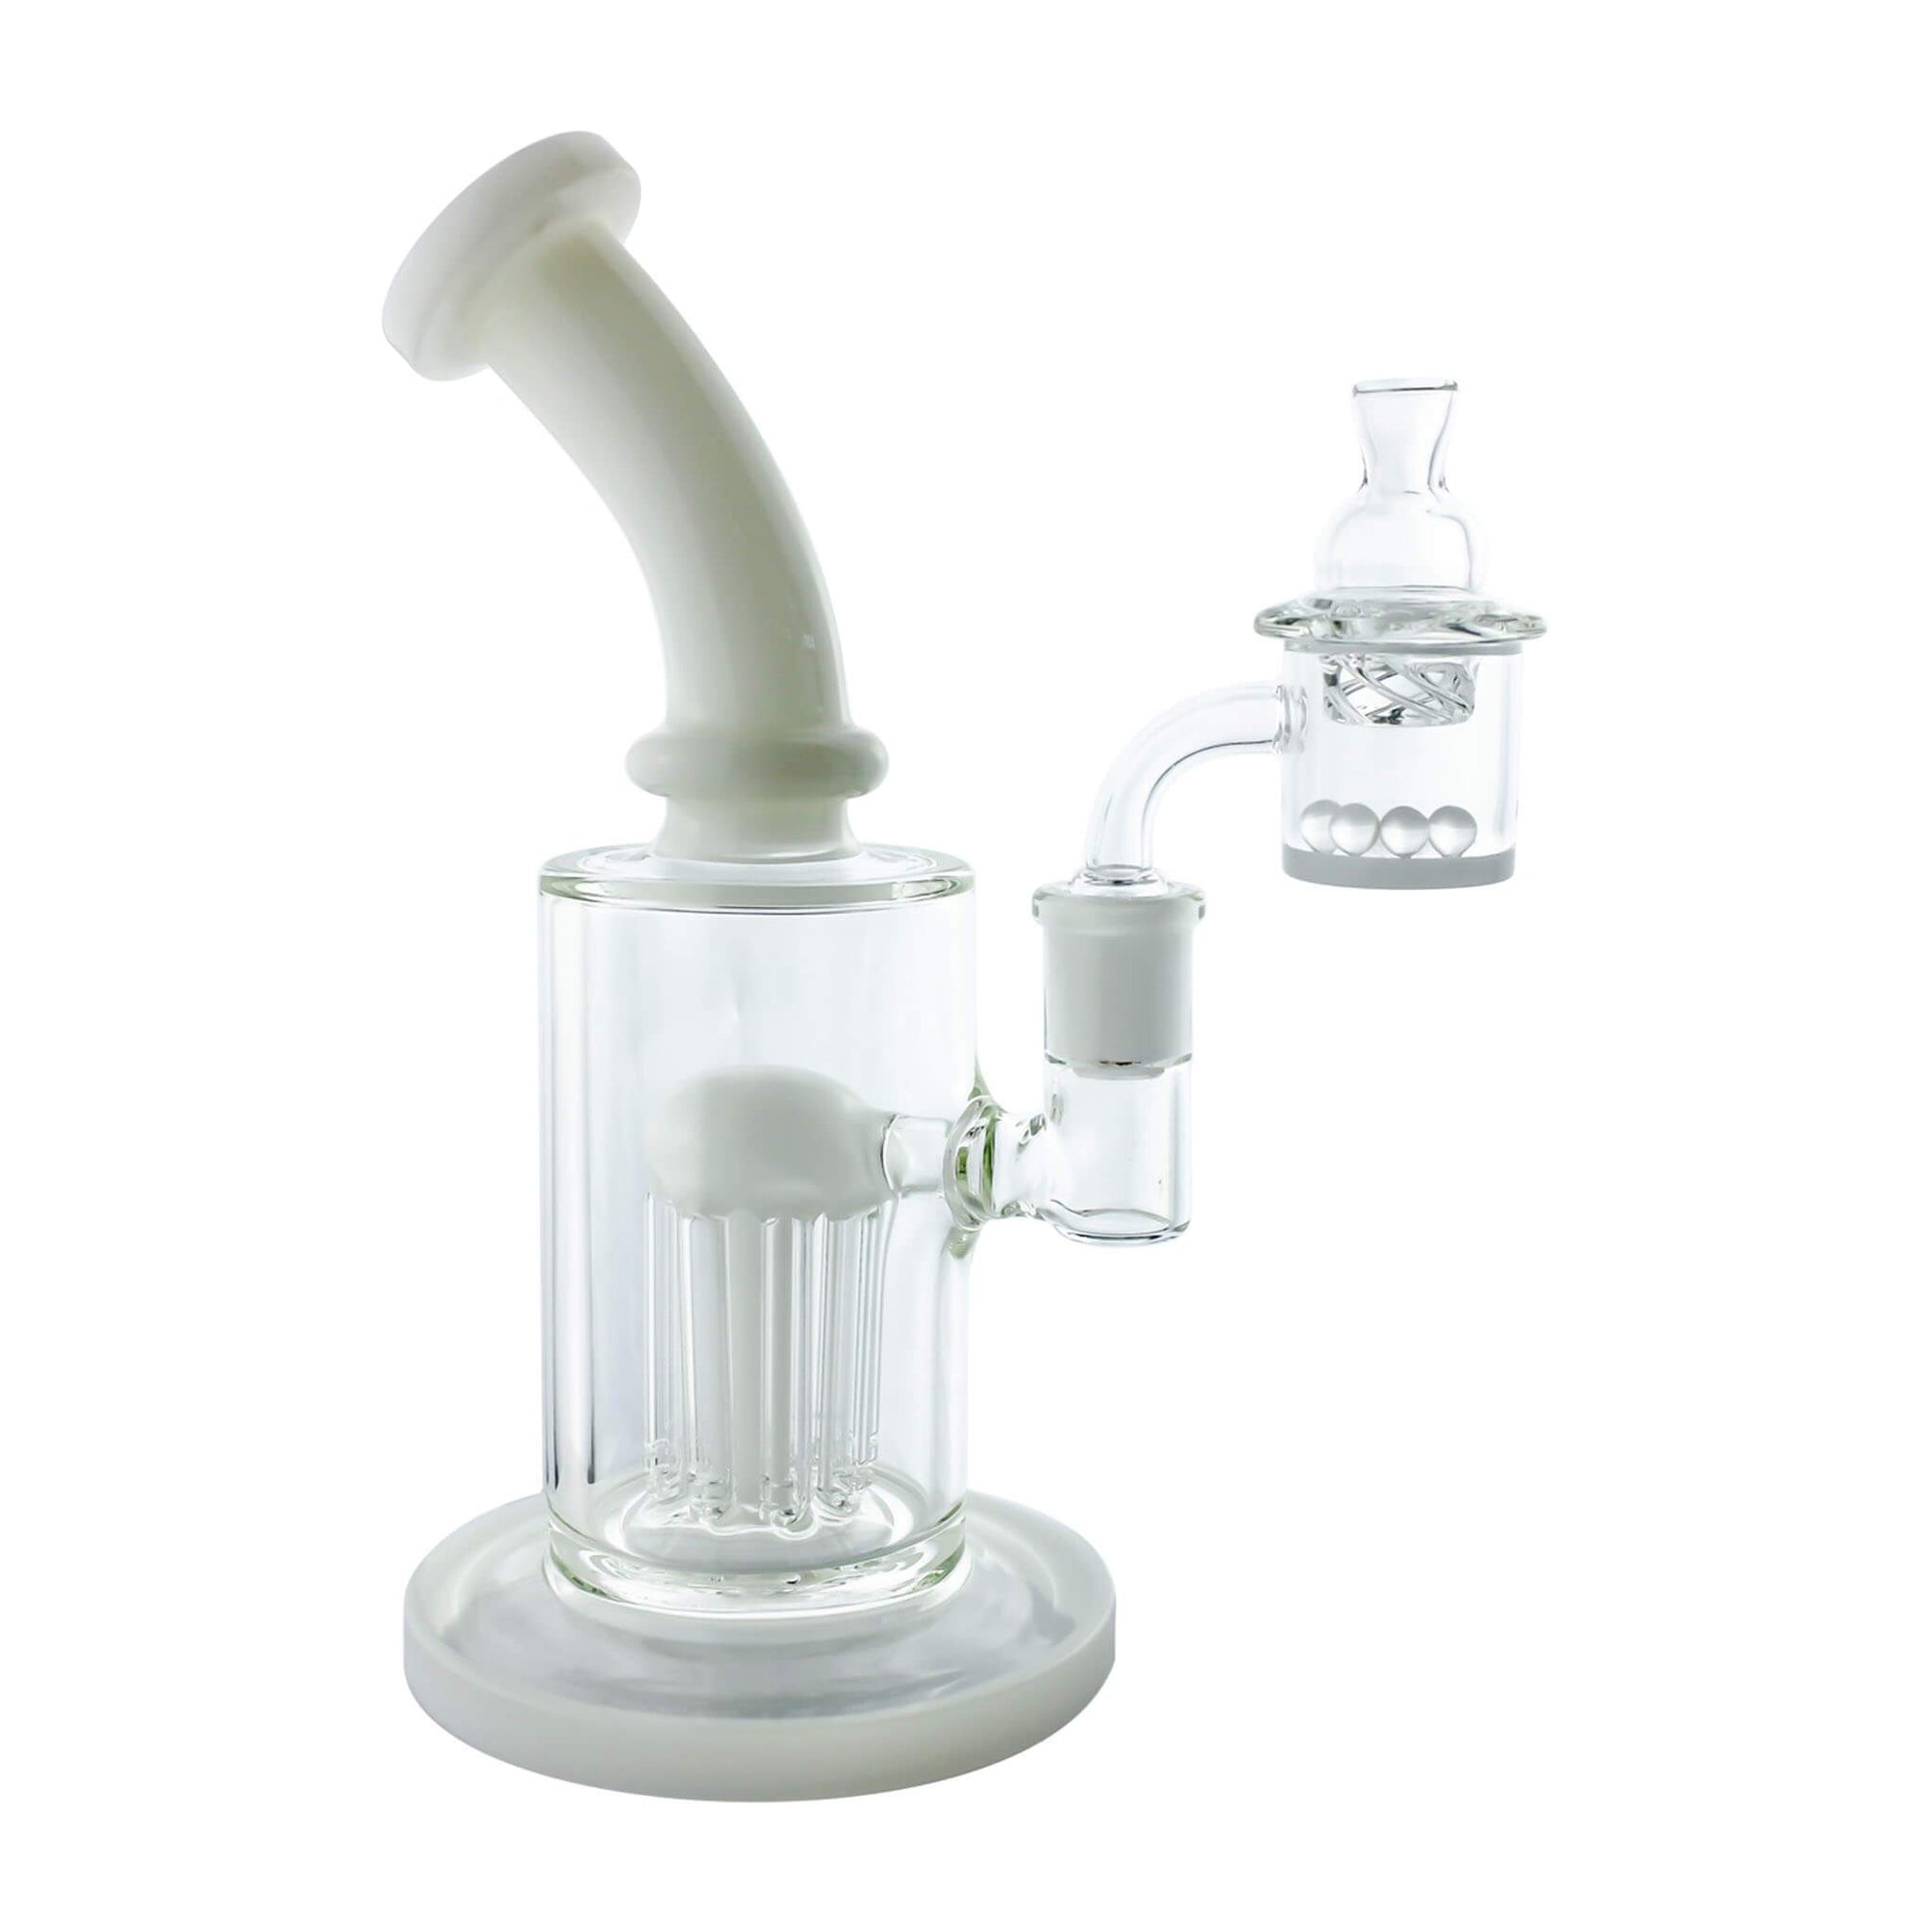 Spin Matrix 30mm Opaque Banger Complete Dabbing Kit #3 | White Complete Kit View | TDS